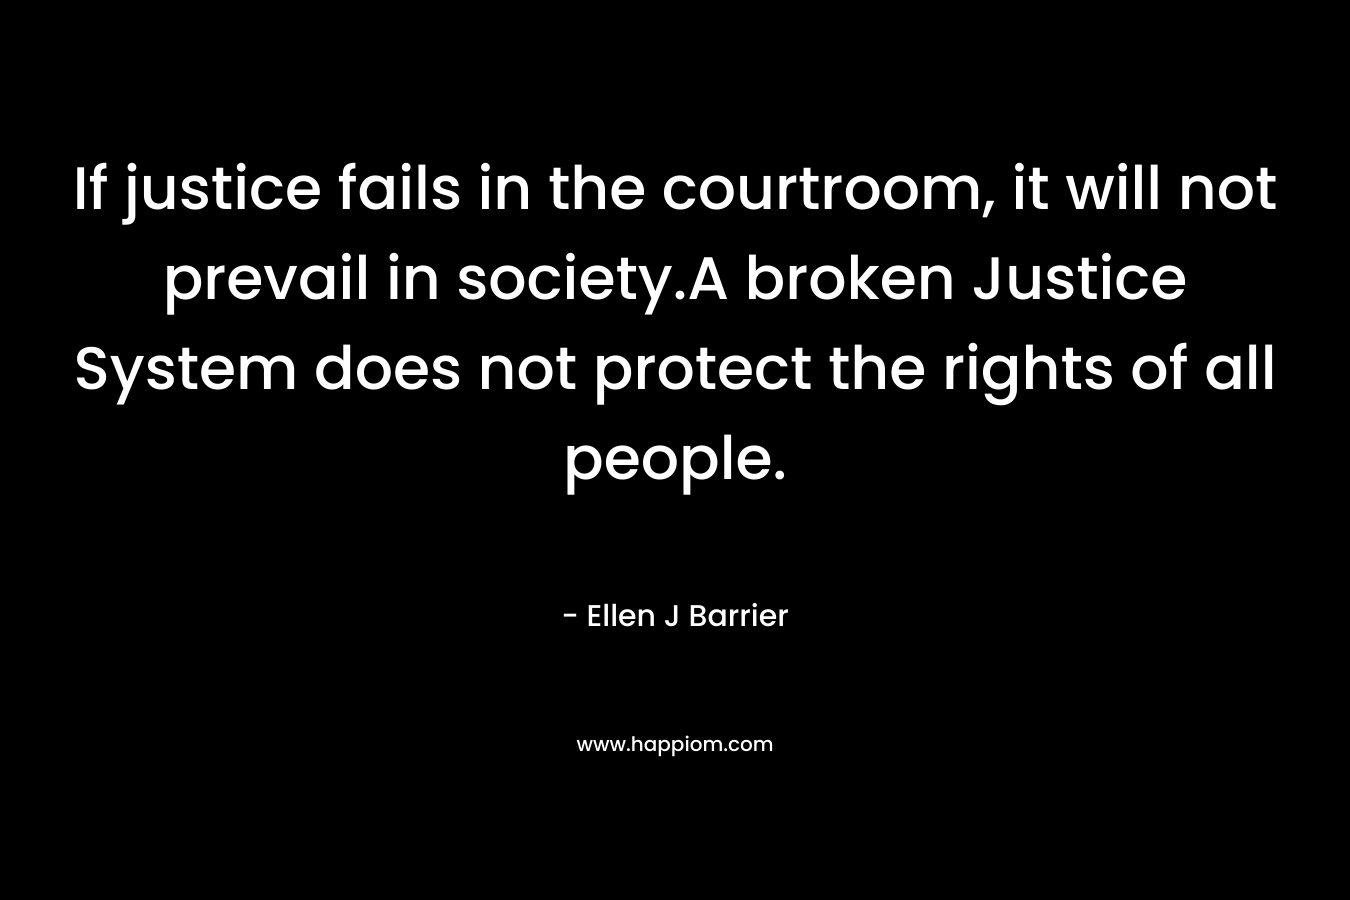 If justice fails in the courtroom, it will not prevail in society.A broken Justice System does not protect the rights of all people.